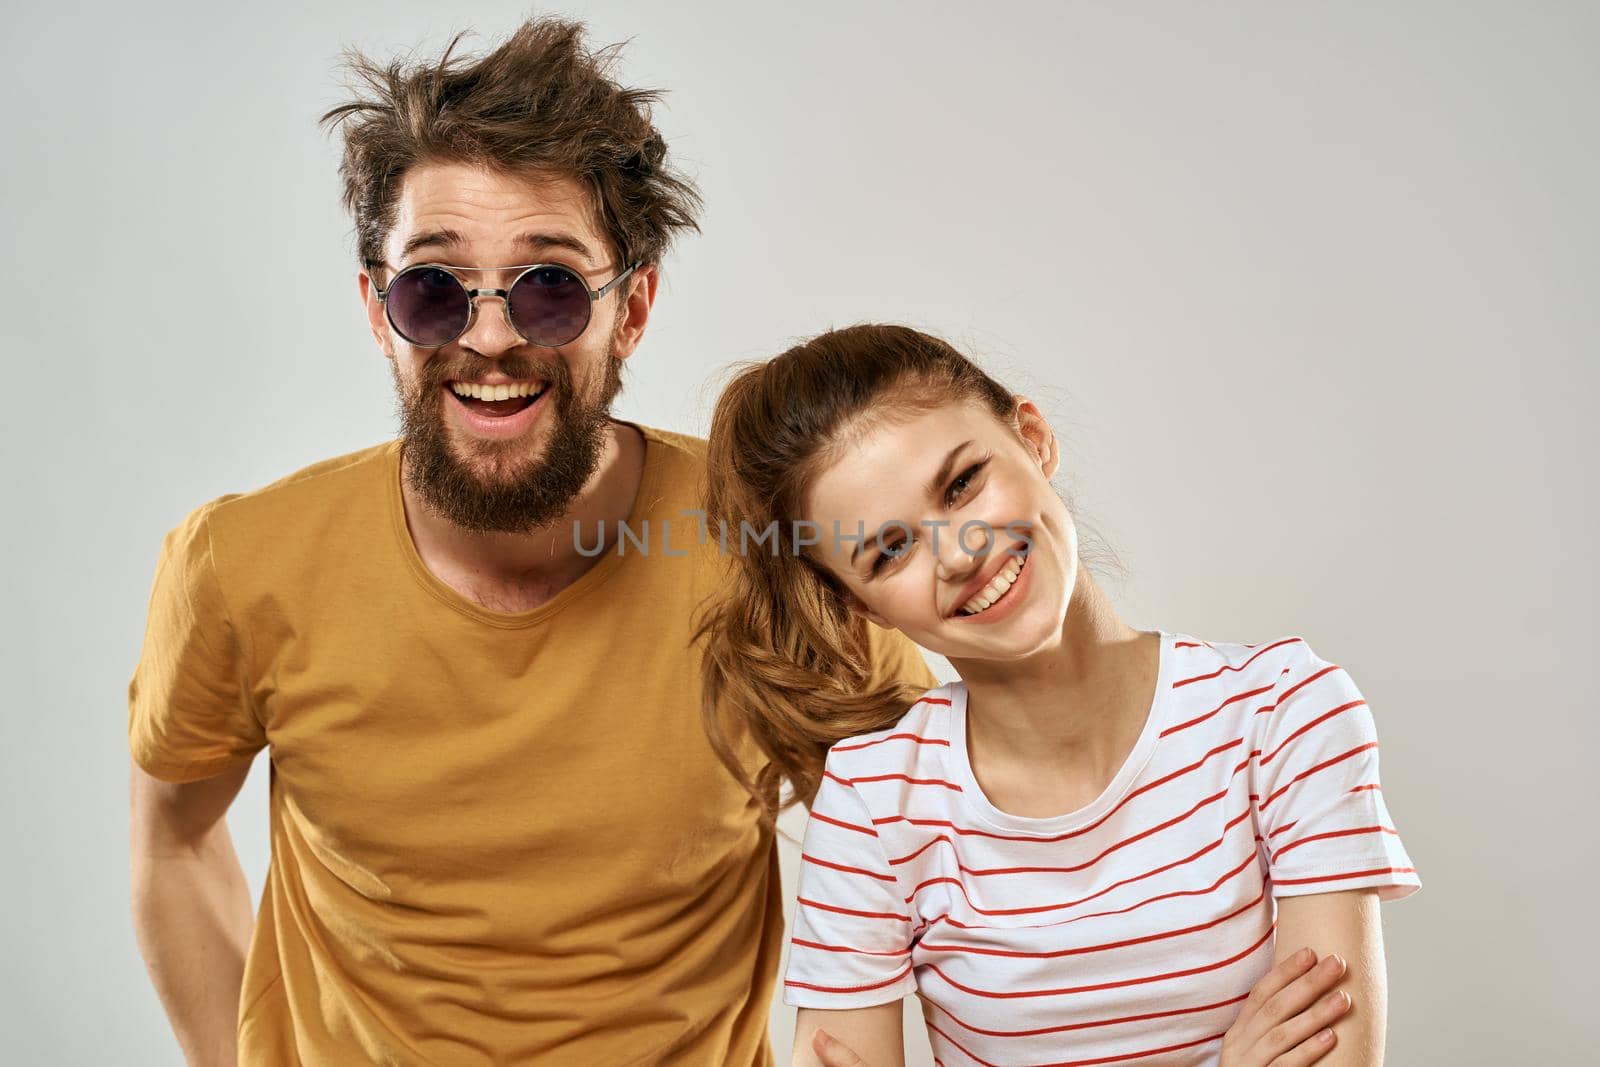 Man in sunglasses next to woman in communication fun friendship lifestyle by SHOTPRIME